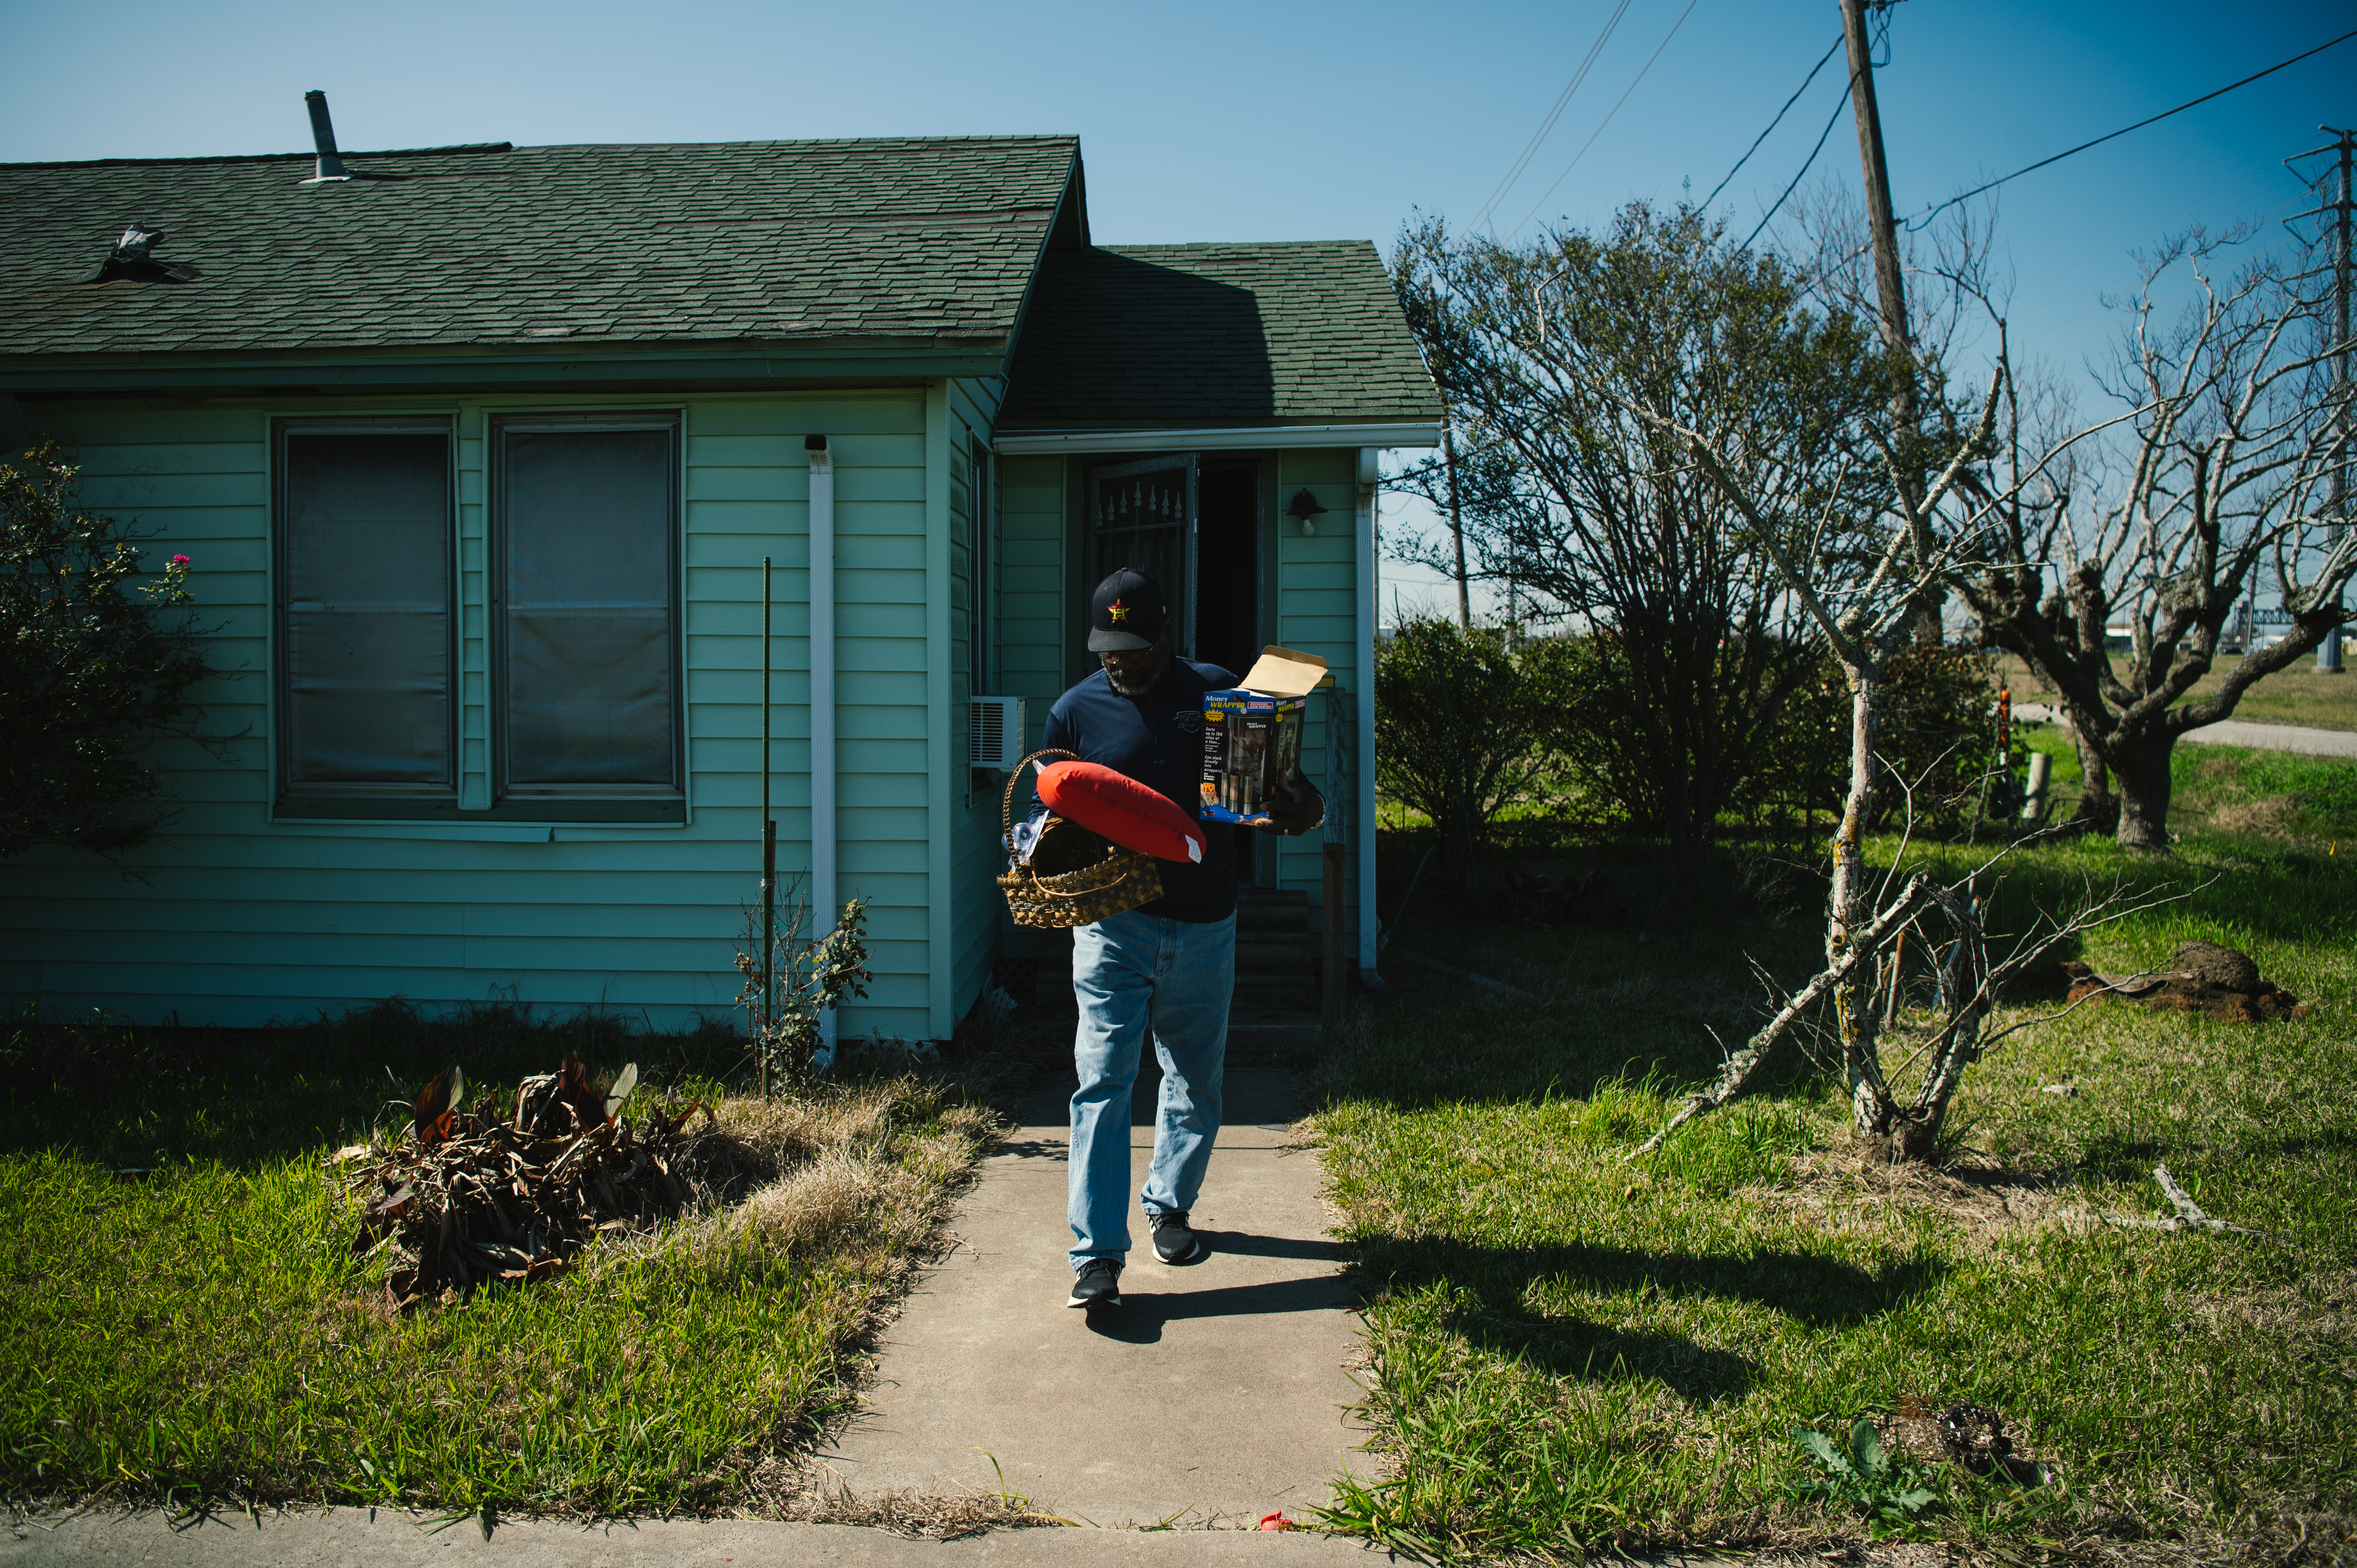 Kenny Jones, a Black man in blue jeans, dark blue shirt and matching cap, carries an armload of belongings out of the Henry Jones' home in Freeport, now condemned by the Port Freeport development.